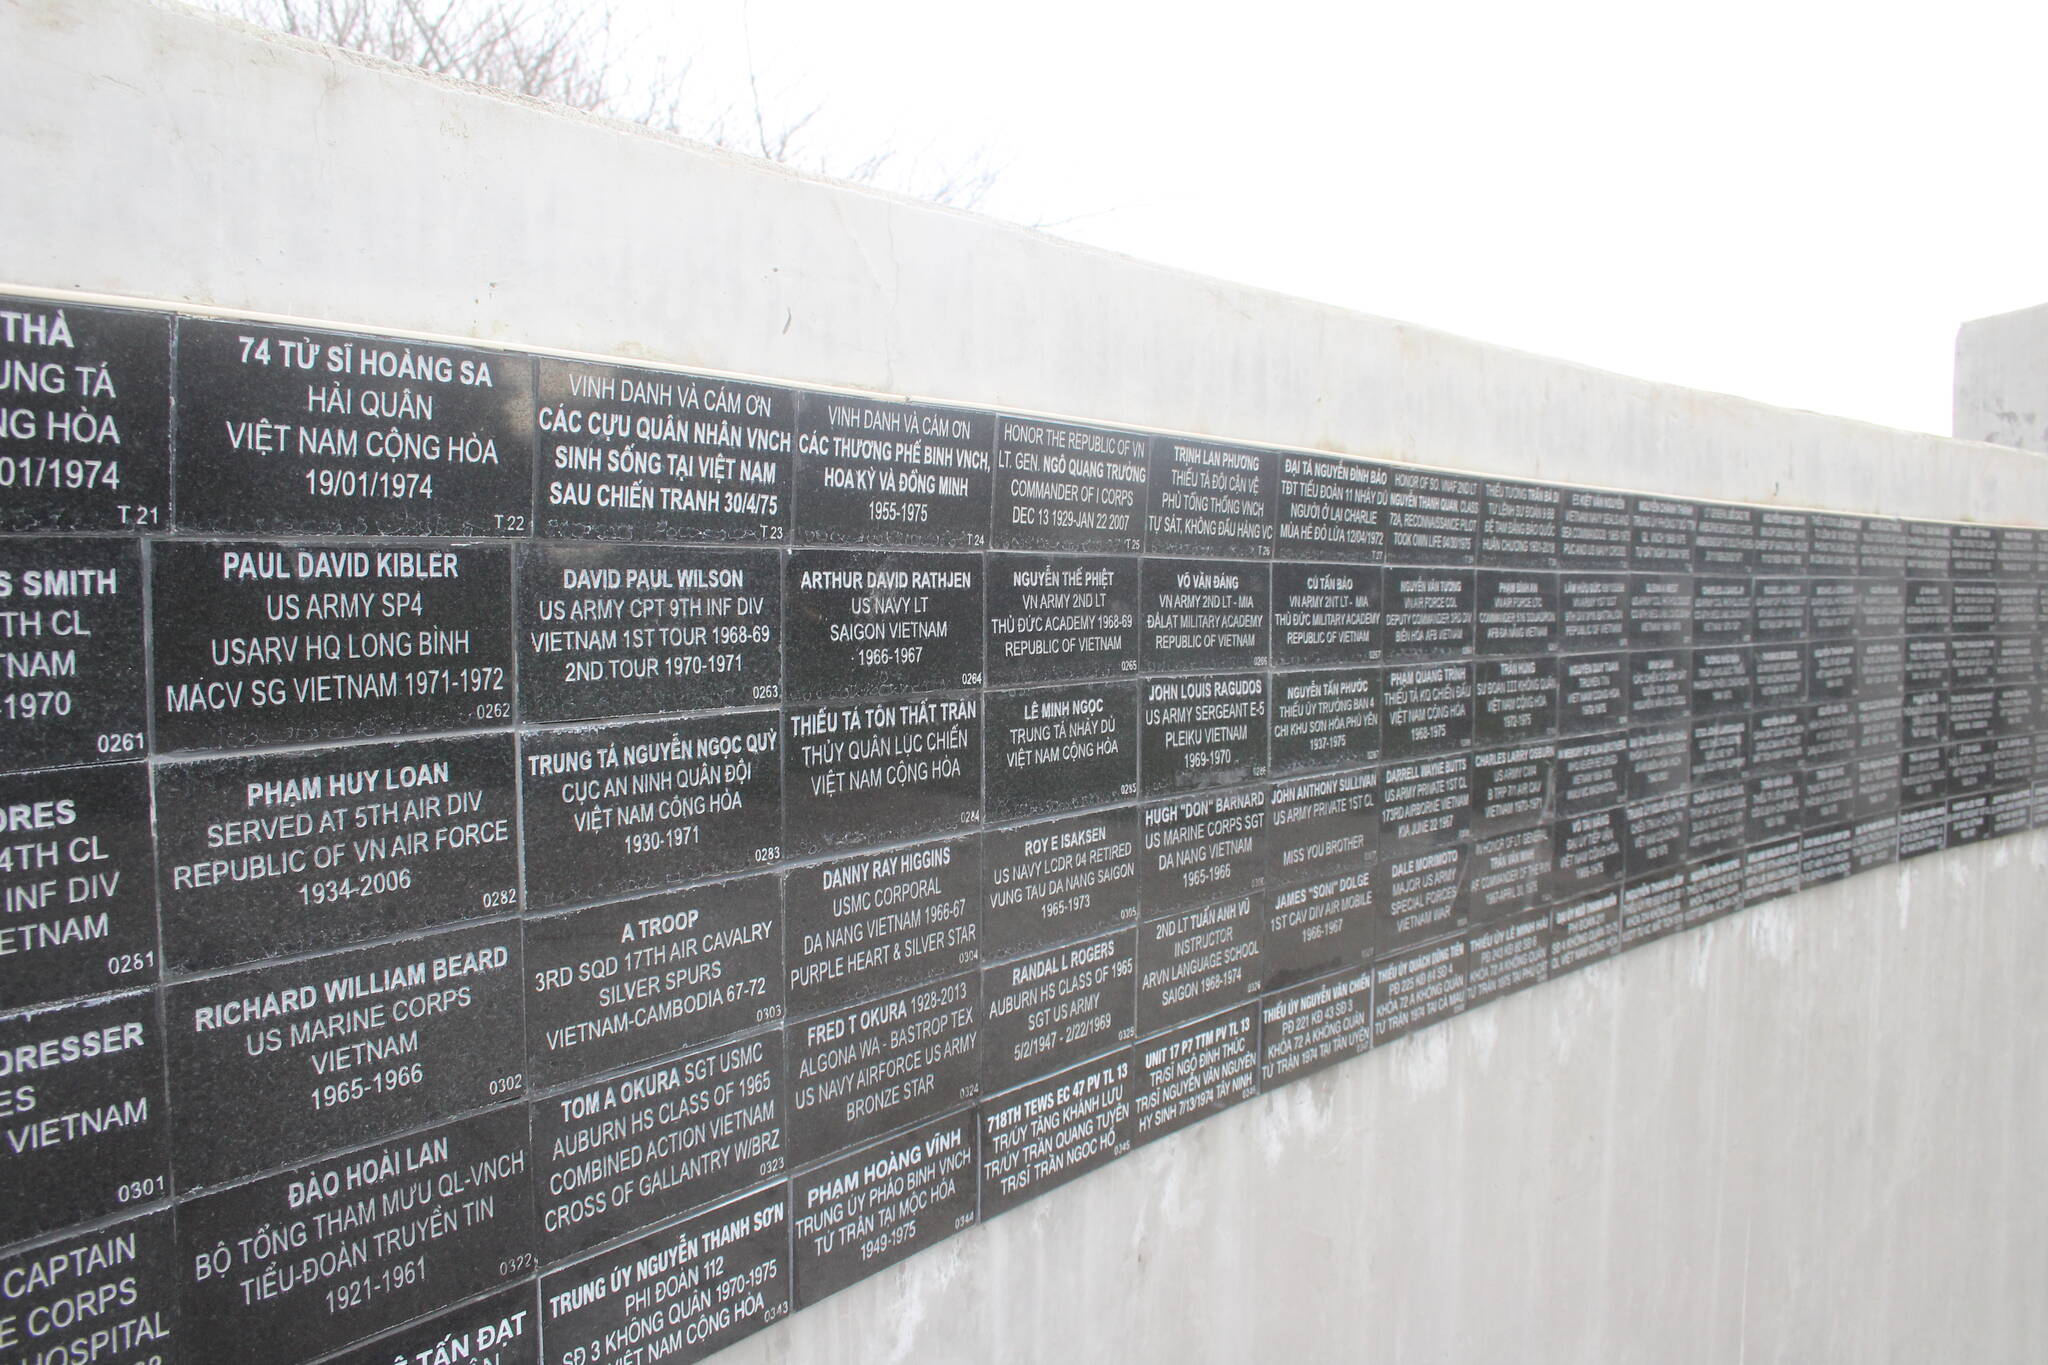 Photo by Henry Stewart-Wood/Sound Publishing
Wall of plaques honoring veterans of the Vietnam War at the Vietnam War Memorial in Les Gove Park.